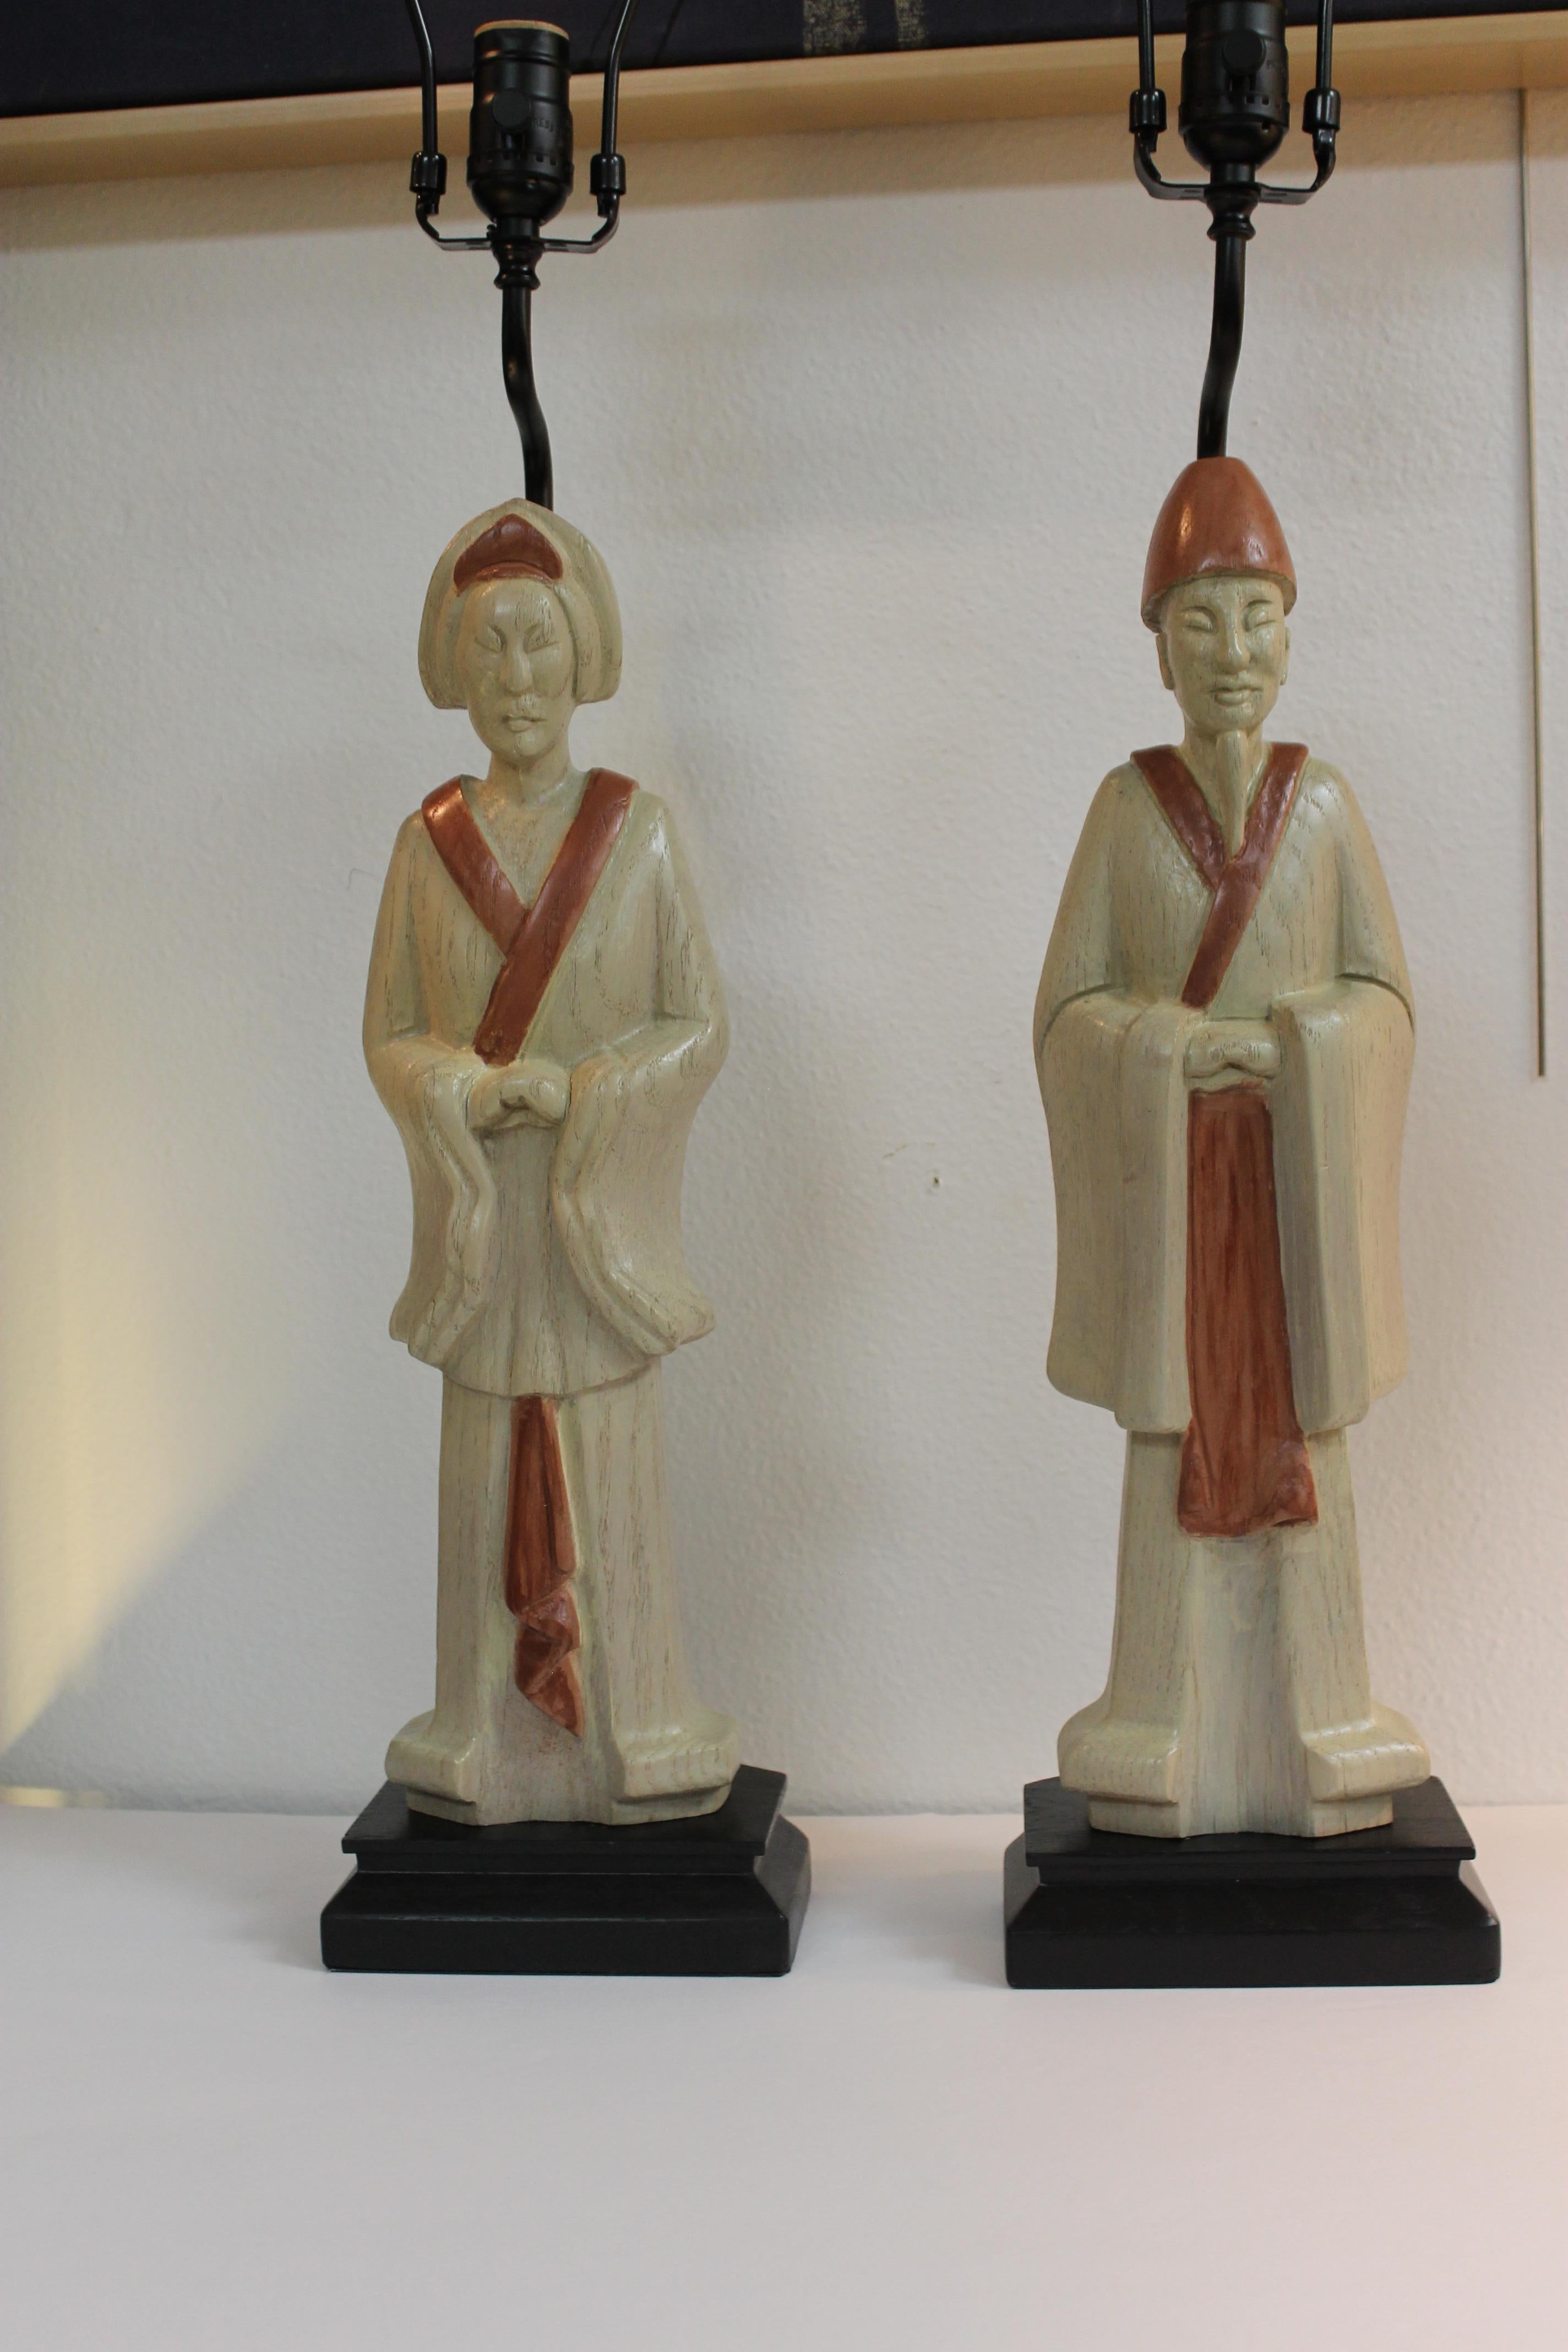 Pair of wood Asian lamps. Wood has been refinished highlighting the robes and head dress. They measure 23